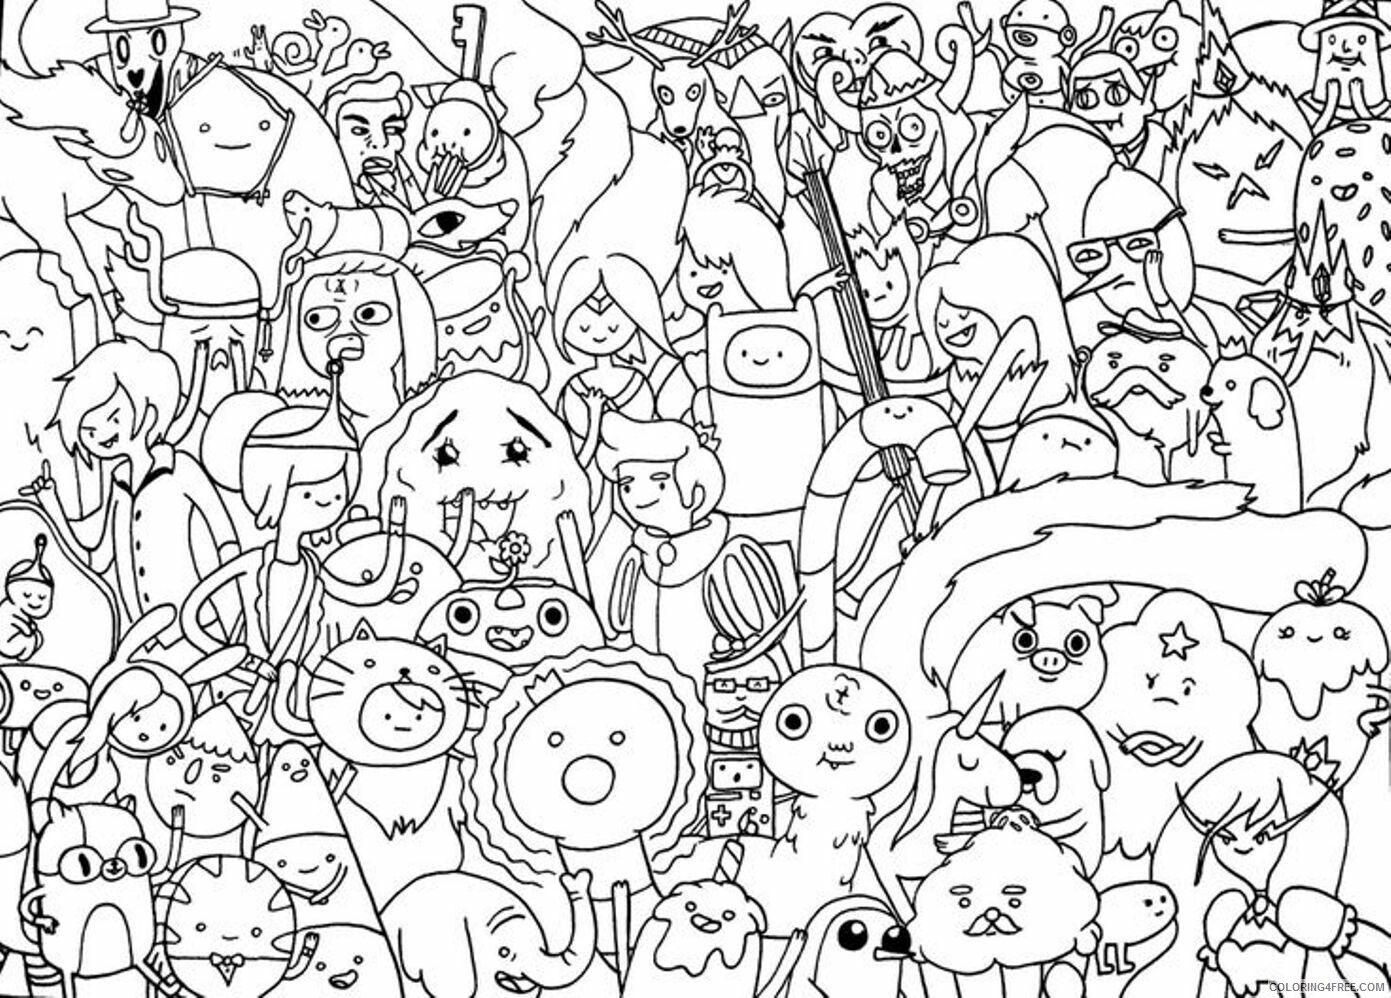 Adventure Time Coloring Pages Online Printable Sheets Free Adventure Time Pages 2021 a 2655 Coloring4free